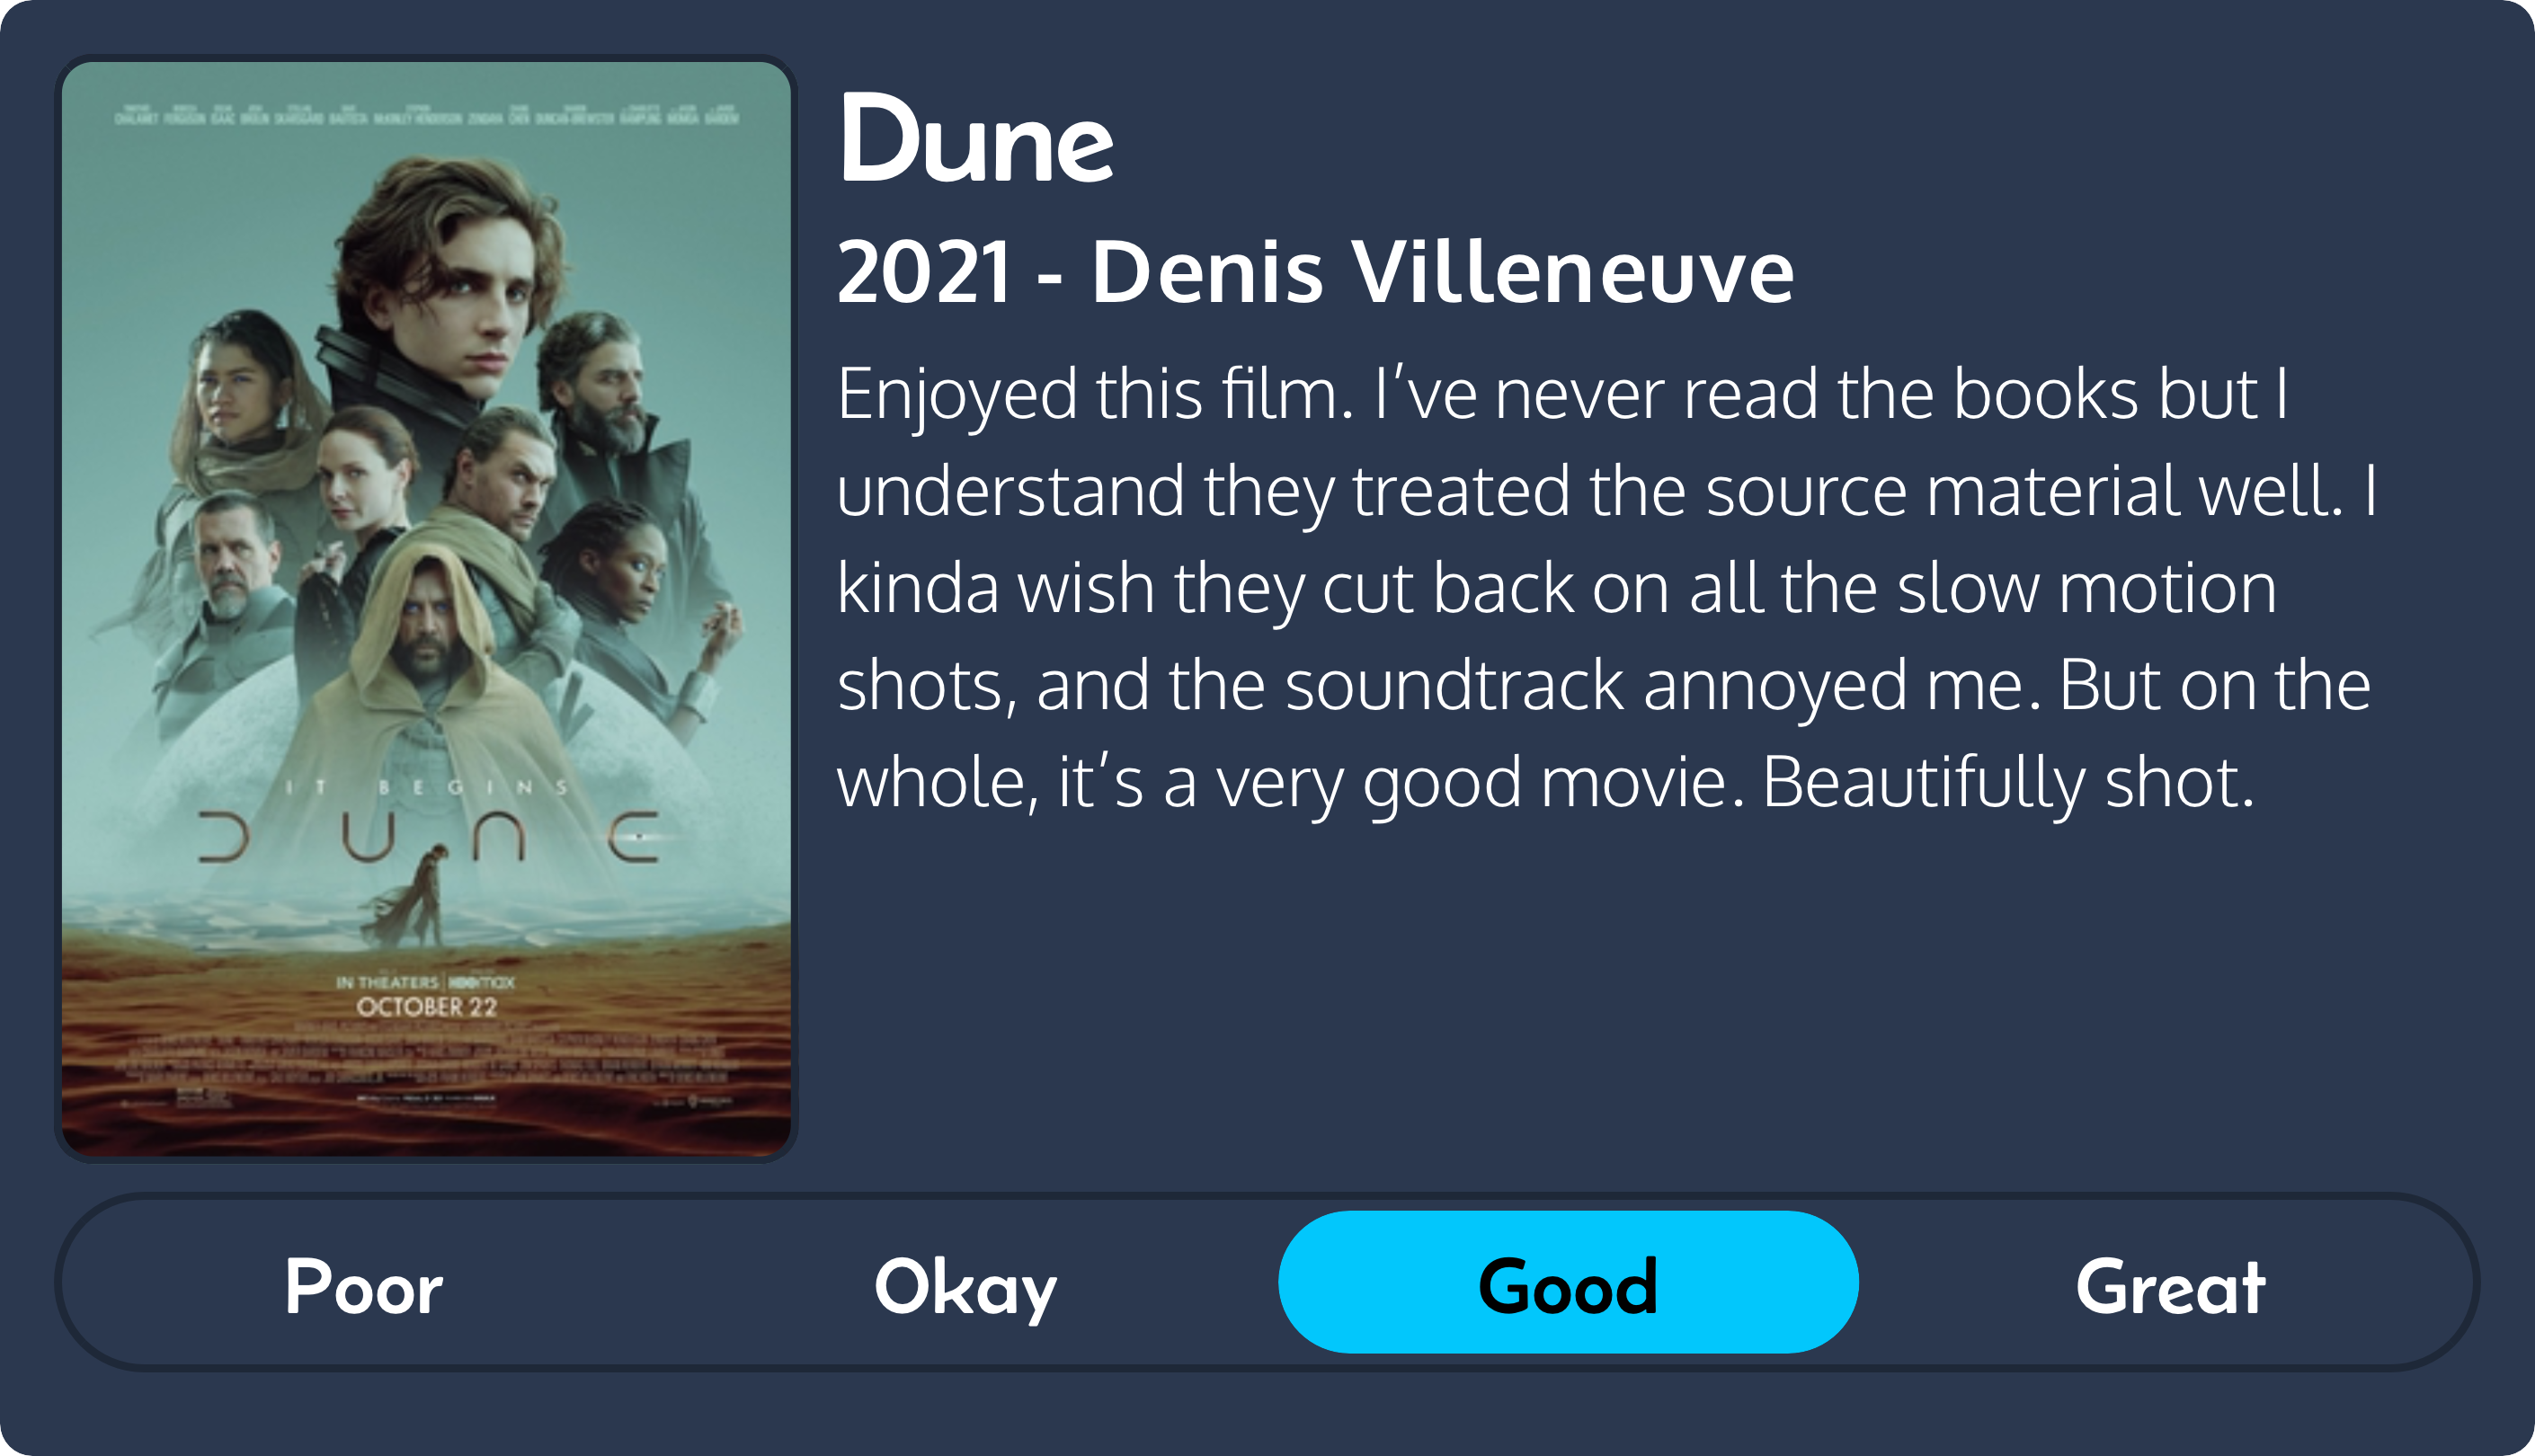 Quick review of Dune, 2021, directed by Denis Villeneuve. Enjoyed this film. I’ve never read the books but I understand they treated the source material well. I kinda wish they cut back on all the slow motion shots, and the soundtrack annoyed me. But on the whole, it’s a very good movie. Beautifully shot. 